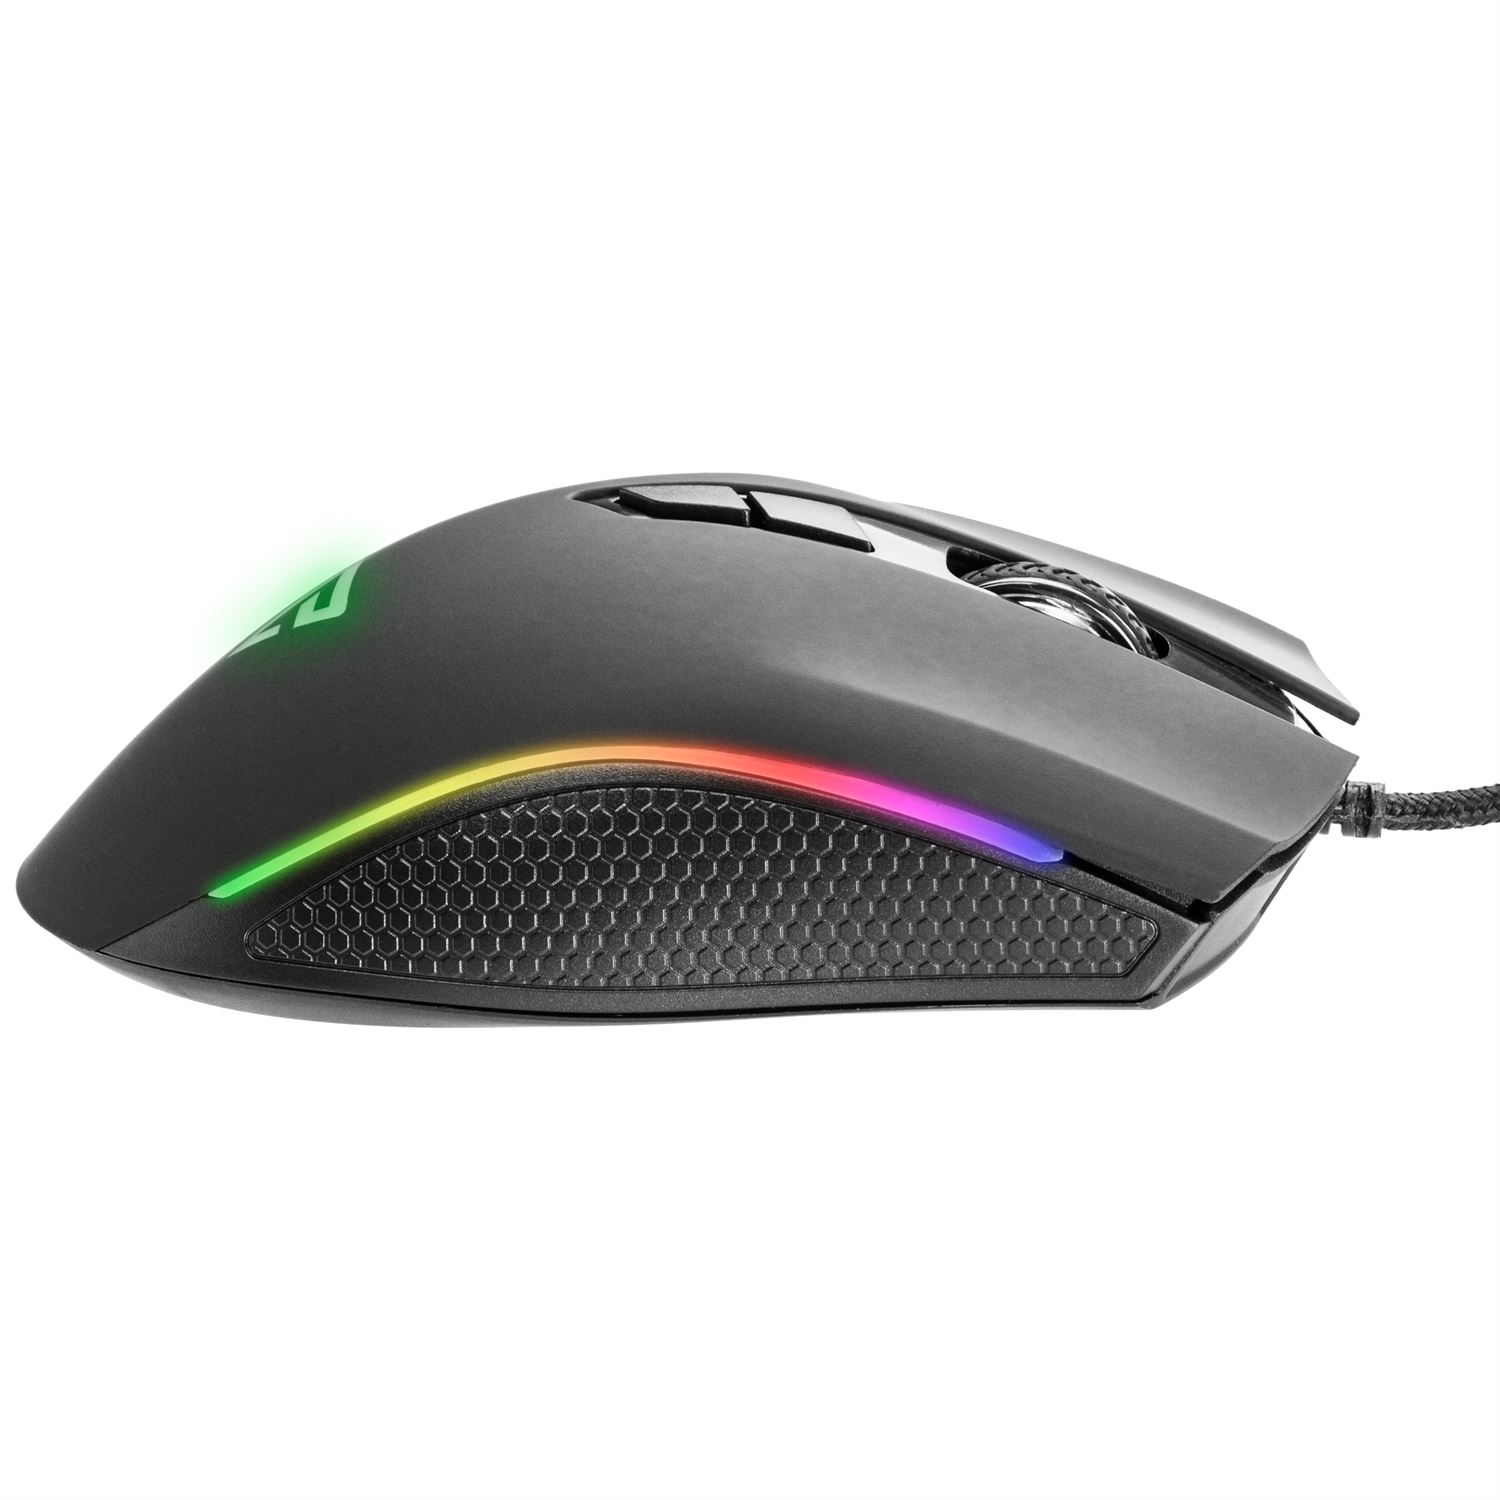 Plakater reductor eksplodere Paracon VIPER Gaming Mouse | Paracon